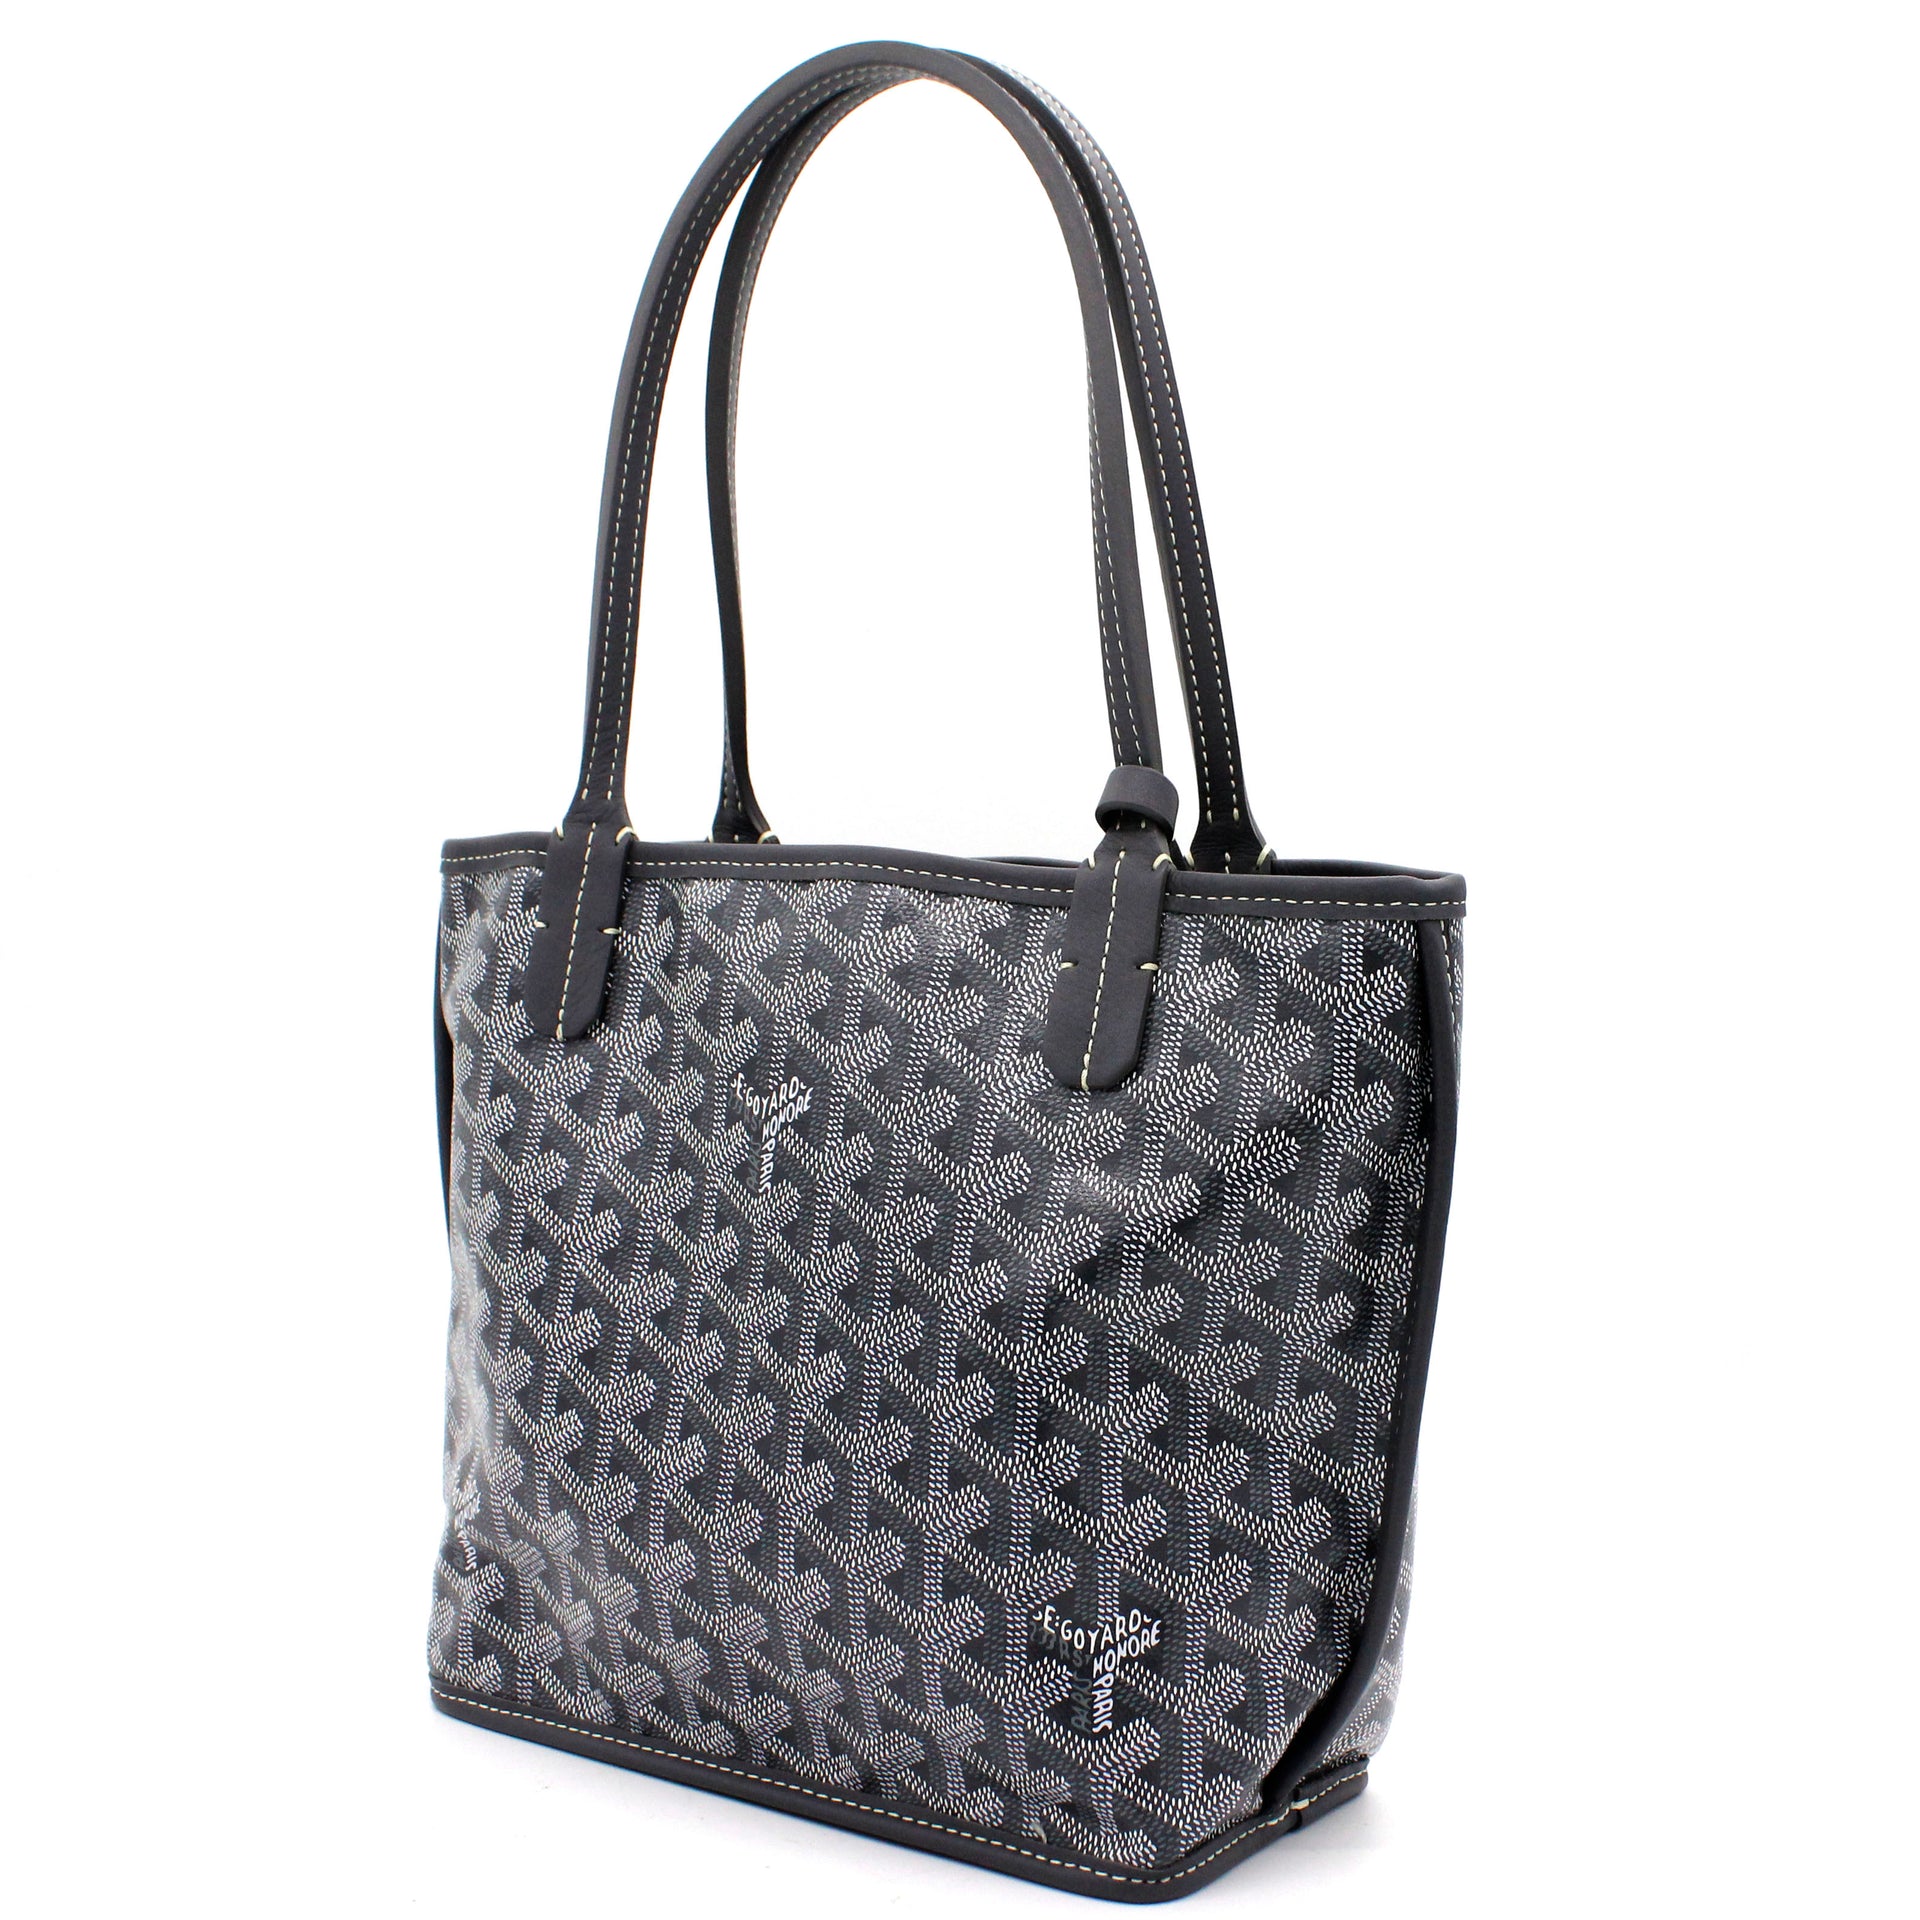 goyard saint louis small tote bag grey canvas grey leather, with dust